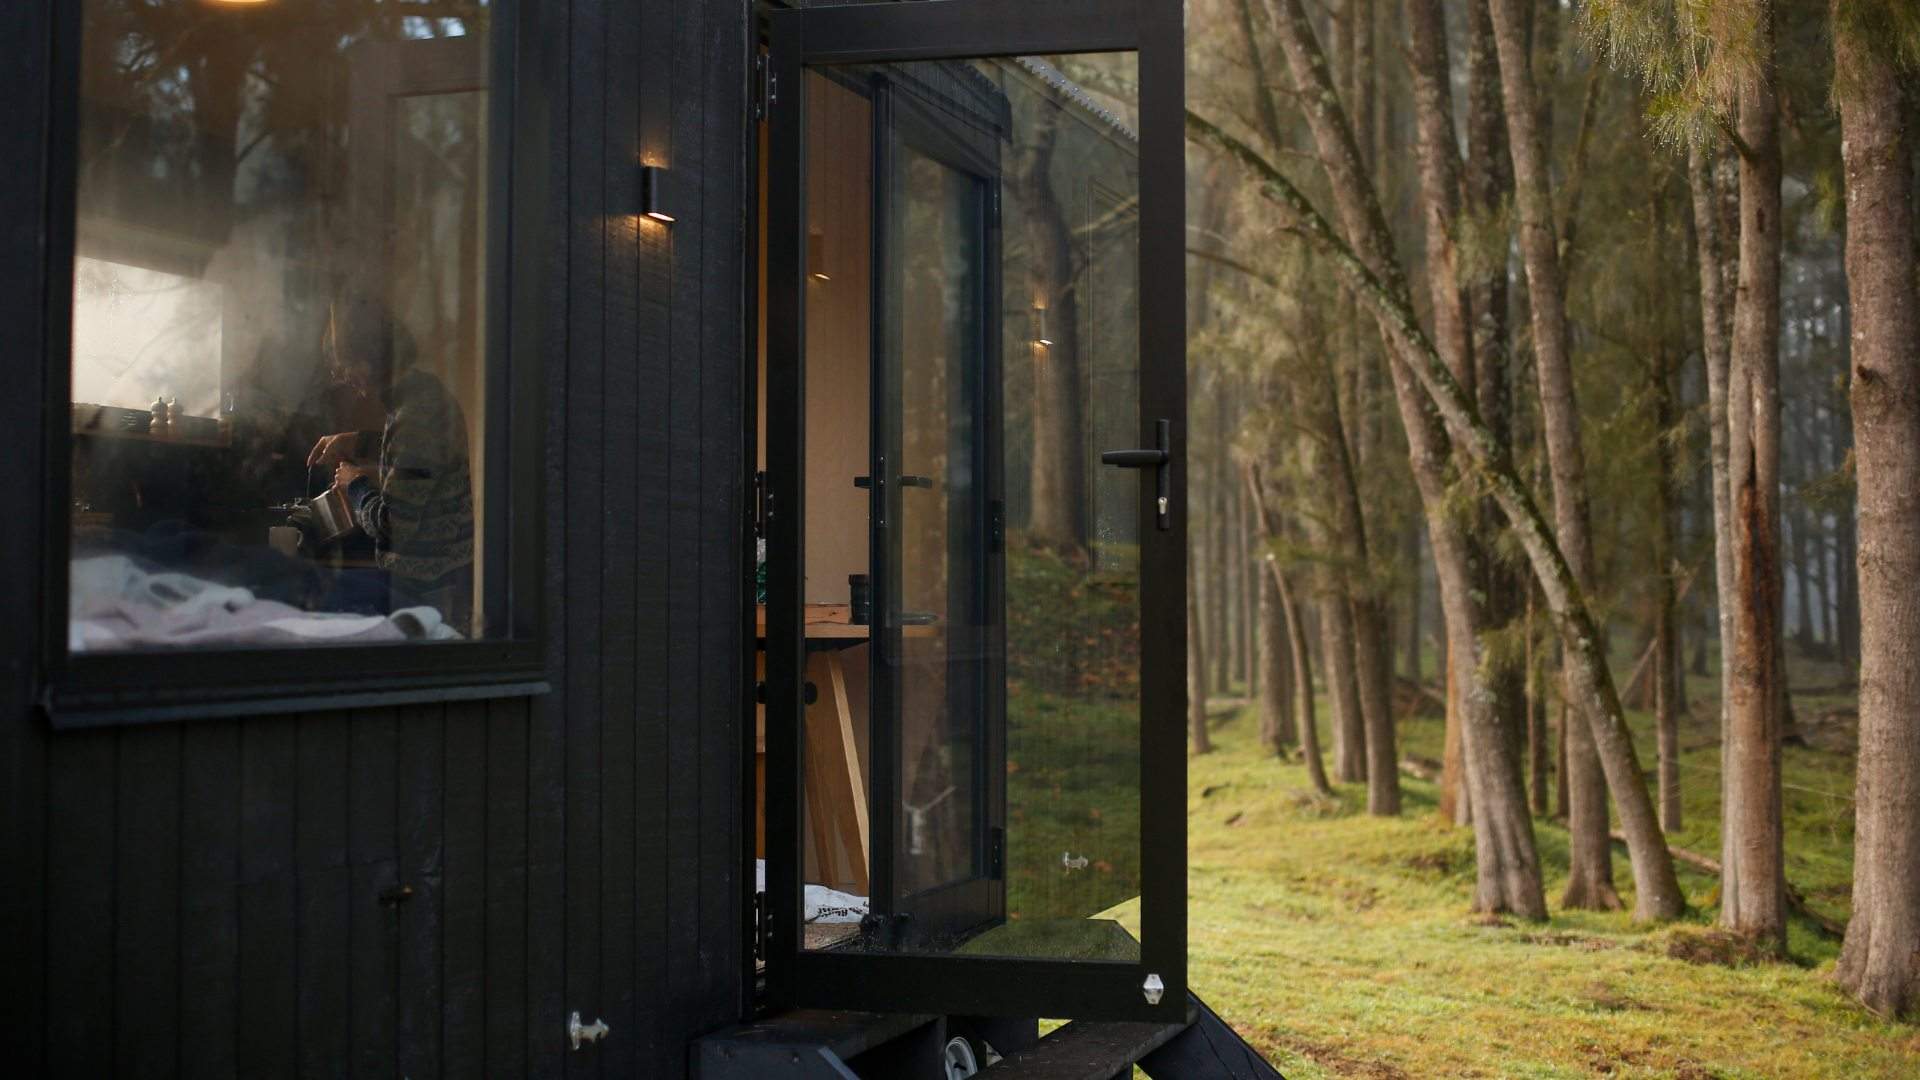 You Can Now Book This Tiny Off-Grid Cabin in the Bush for Your Next Spring Getaway